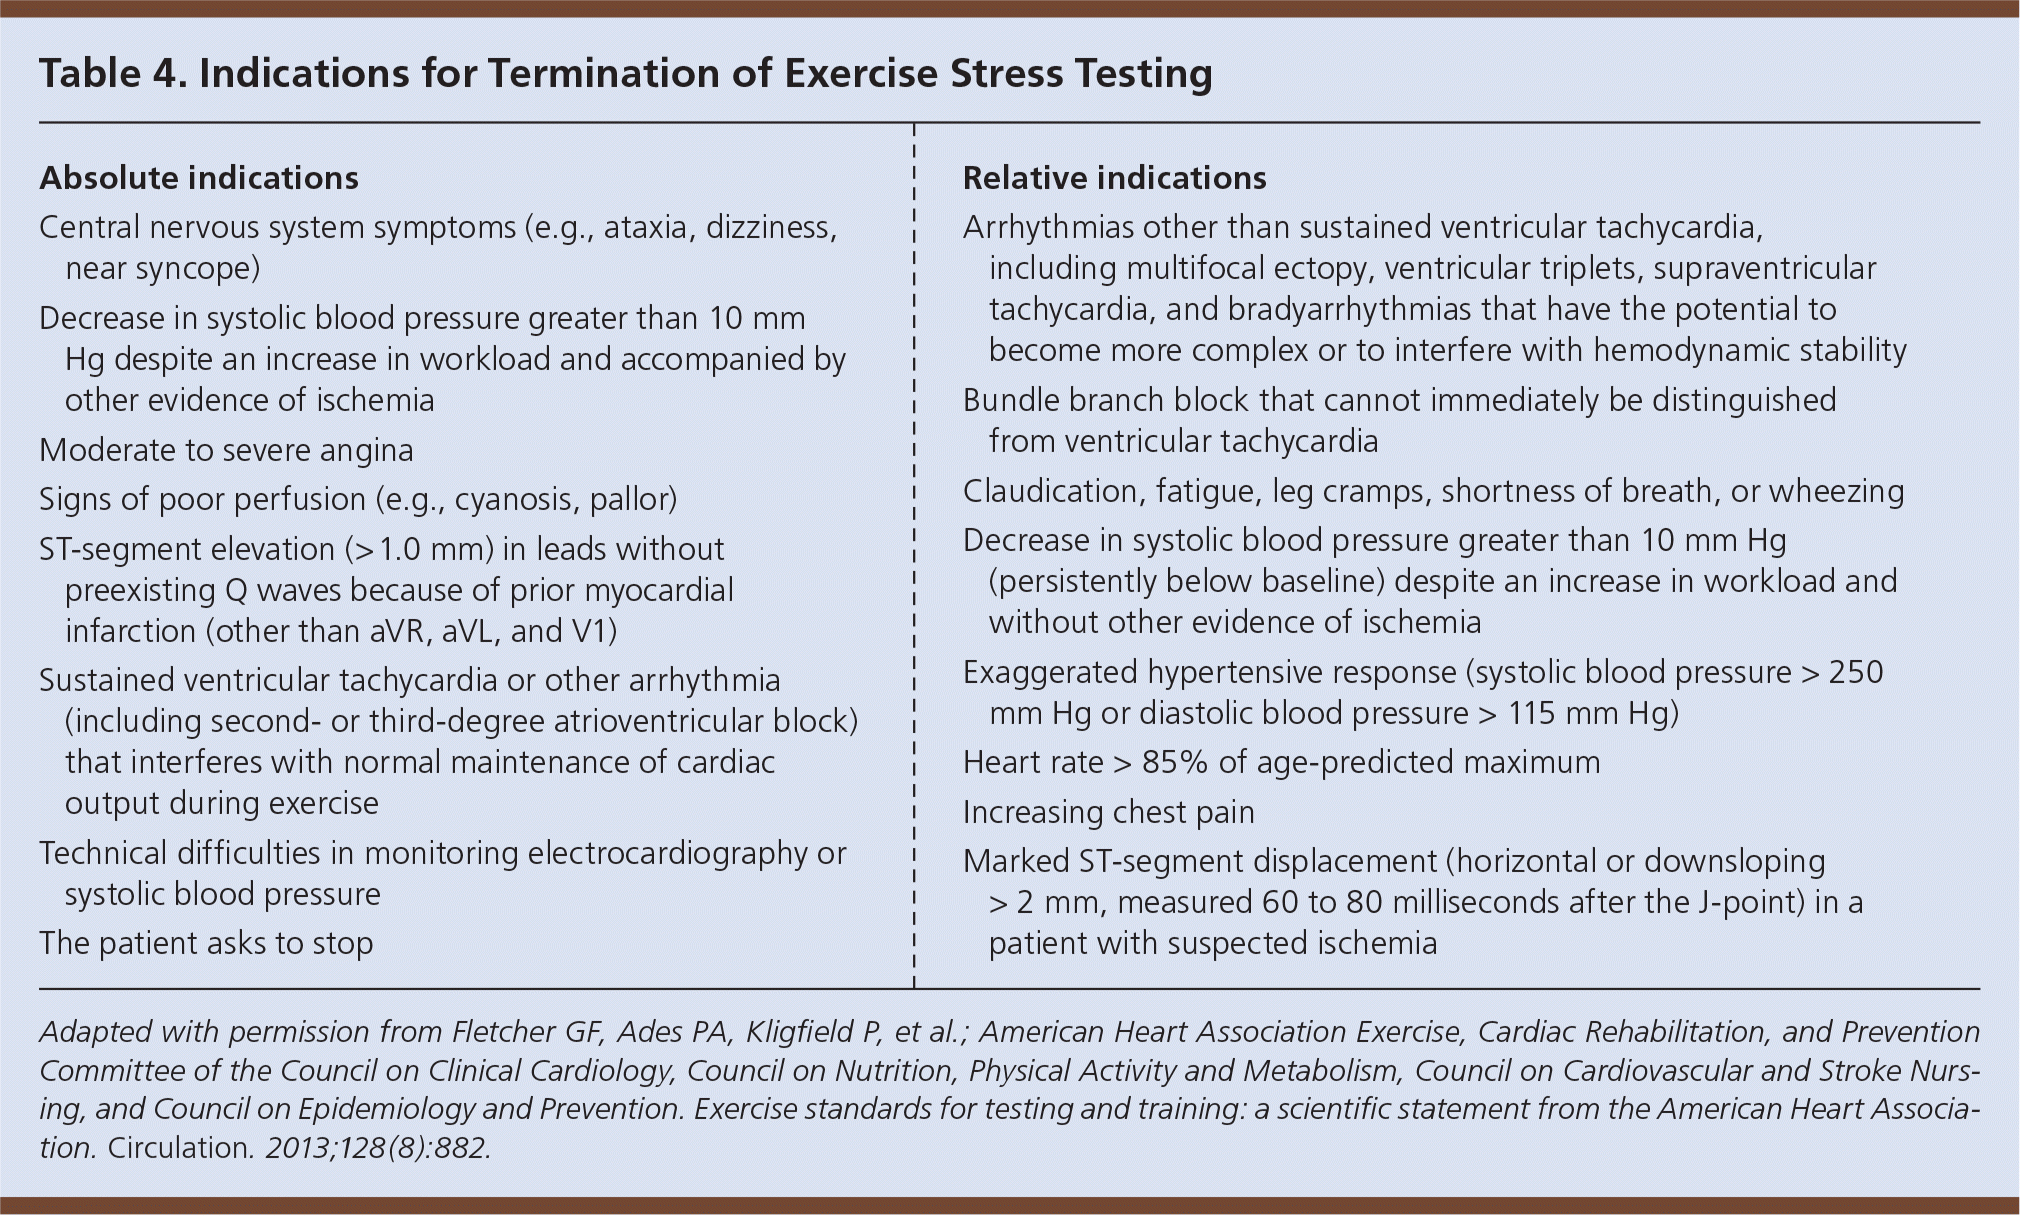 Exercise Standards for Testing and Training